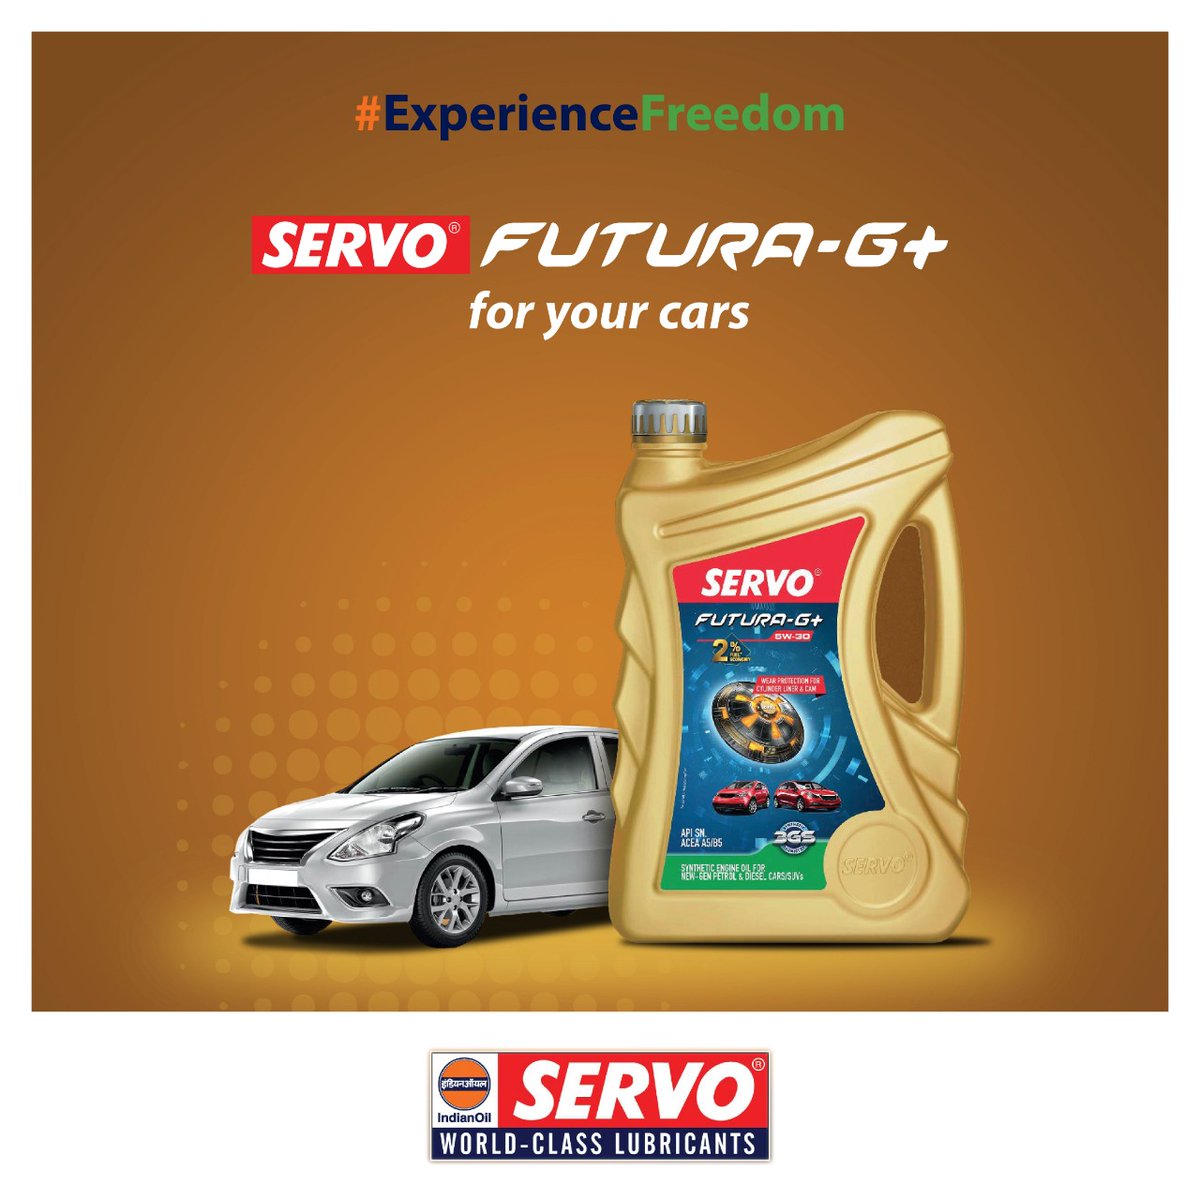 #ExperienceFreedom with Servo Futura-G+ for your cars. Wish you a safe #IndependenceDayIndia2020 @IndianOilcl